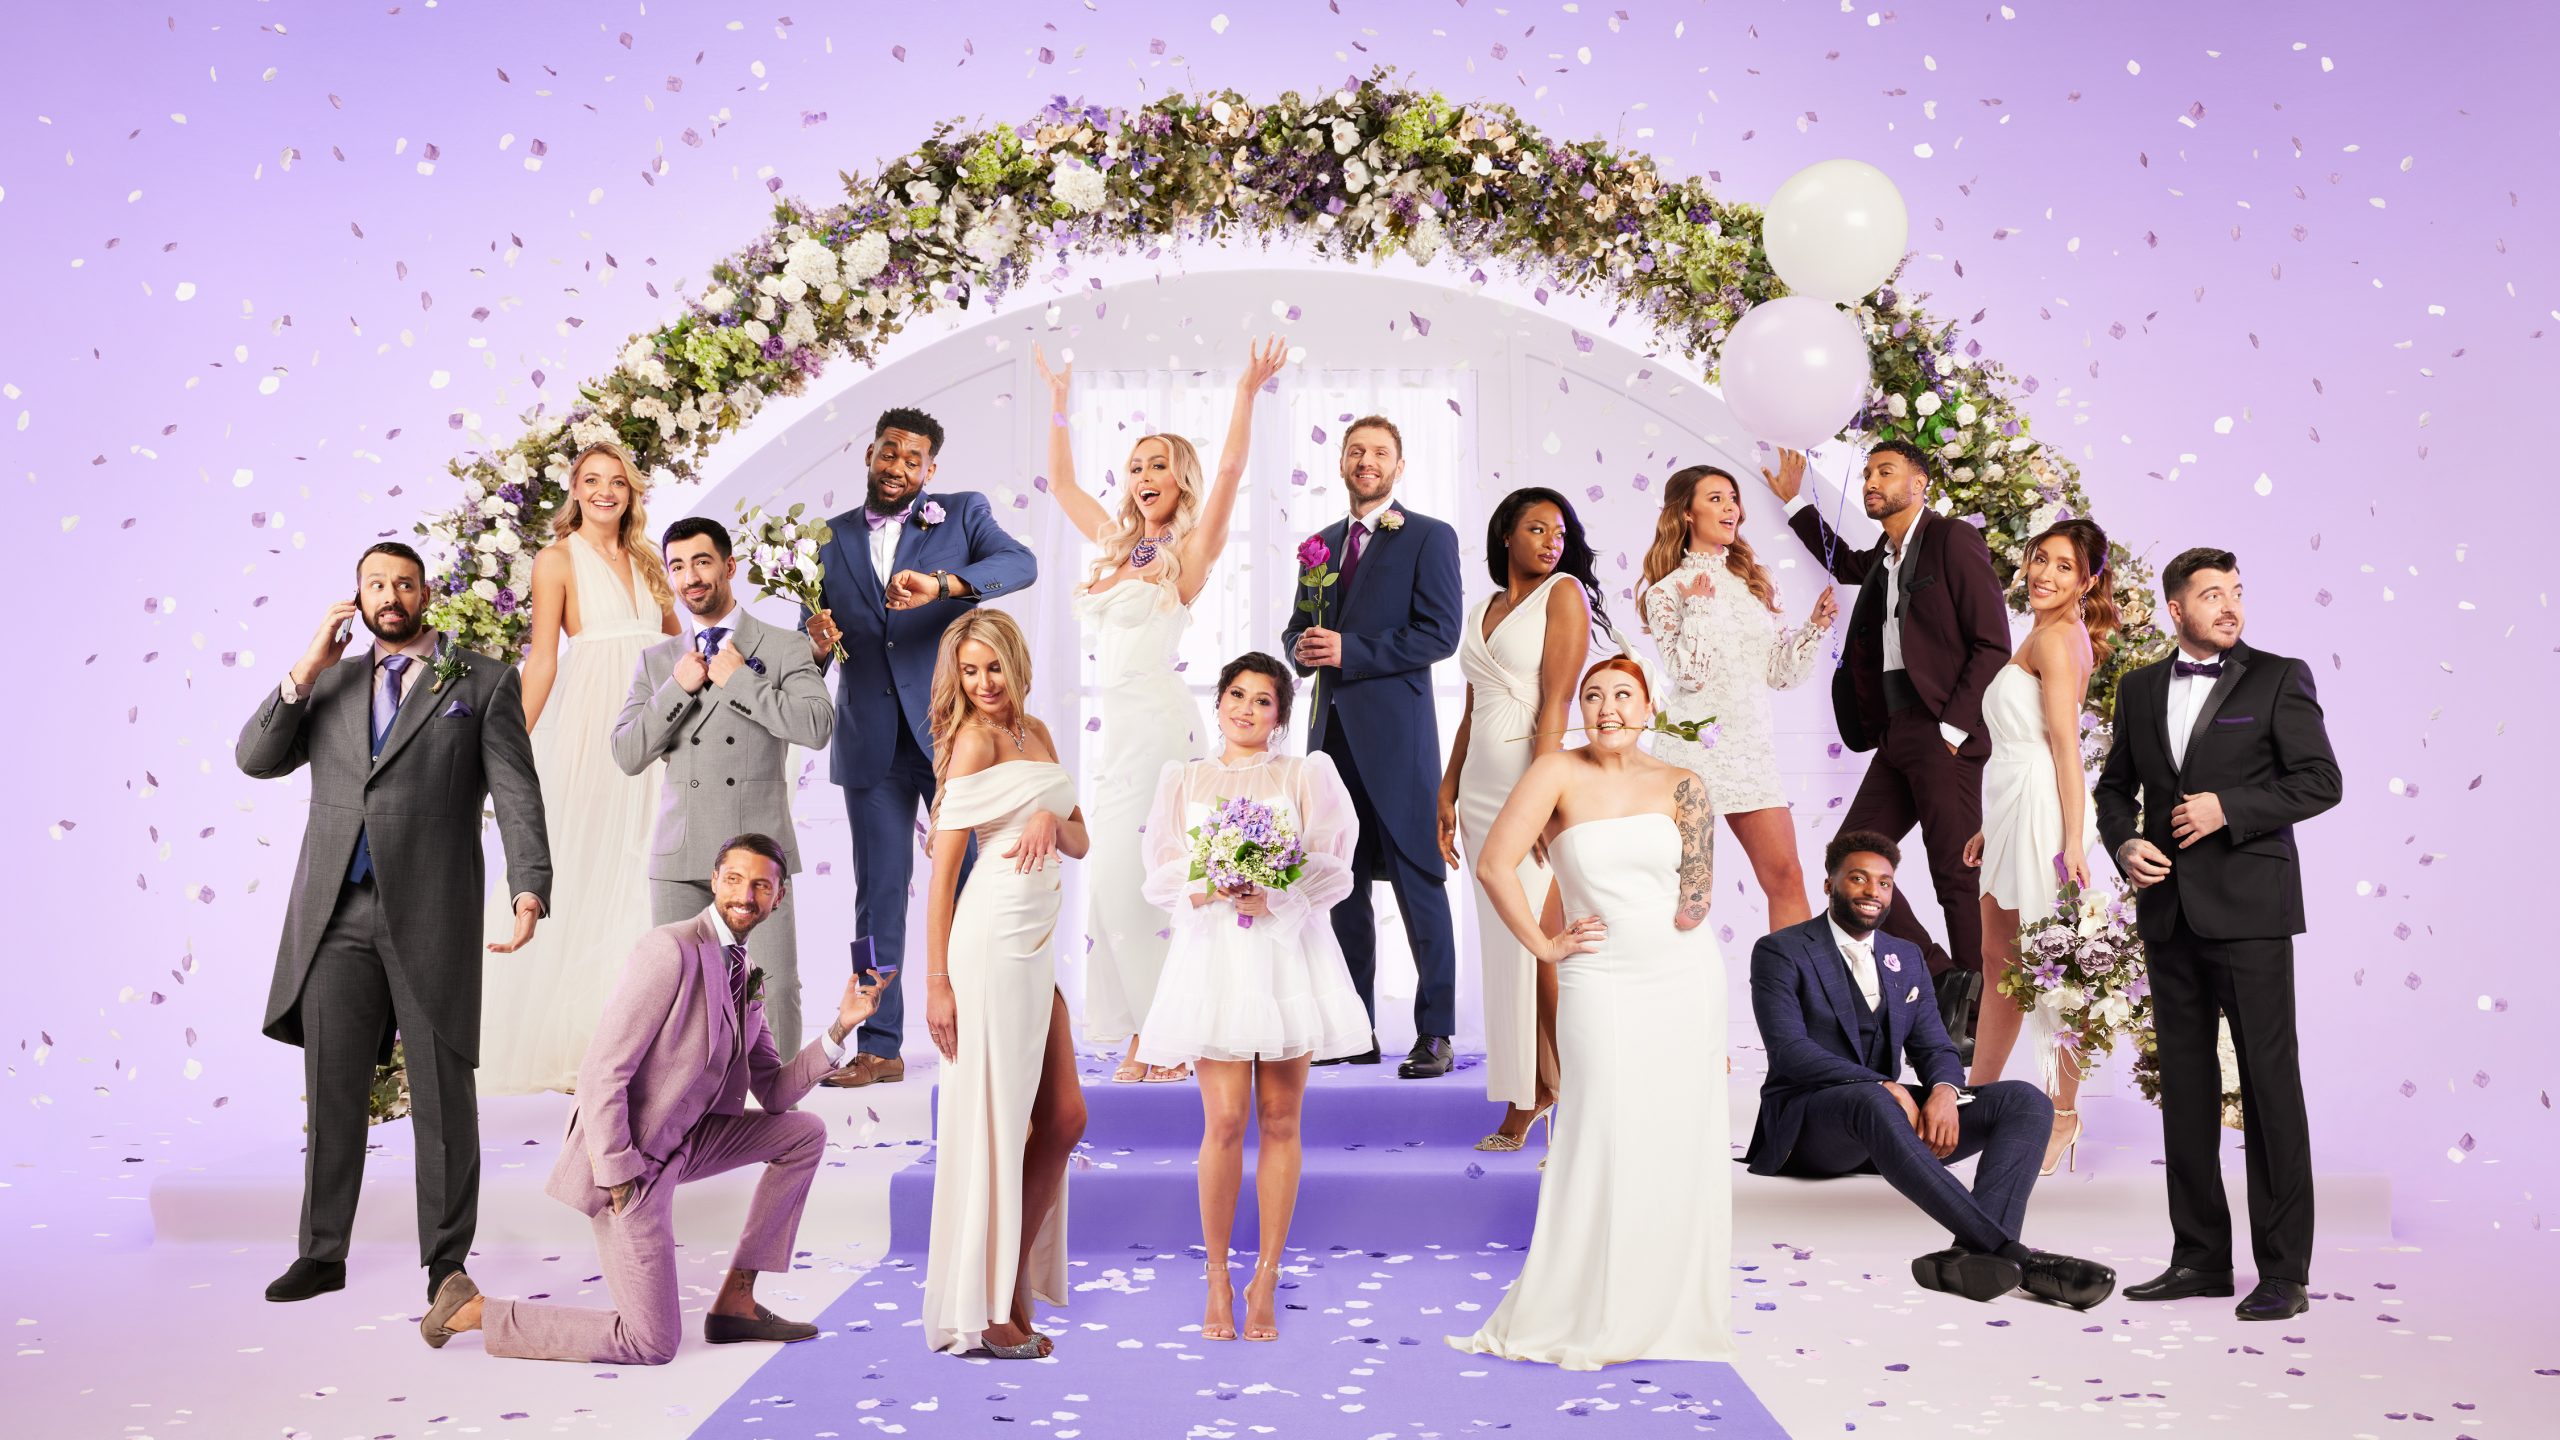 Inside Married At First Sight UK’s most cringeworthy wedding EVER as Thomas and Rosaline pose for mortifying photoshoot